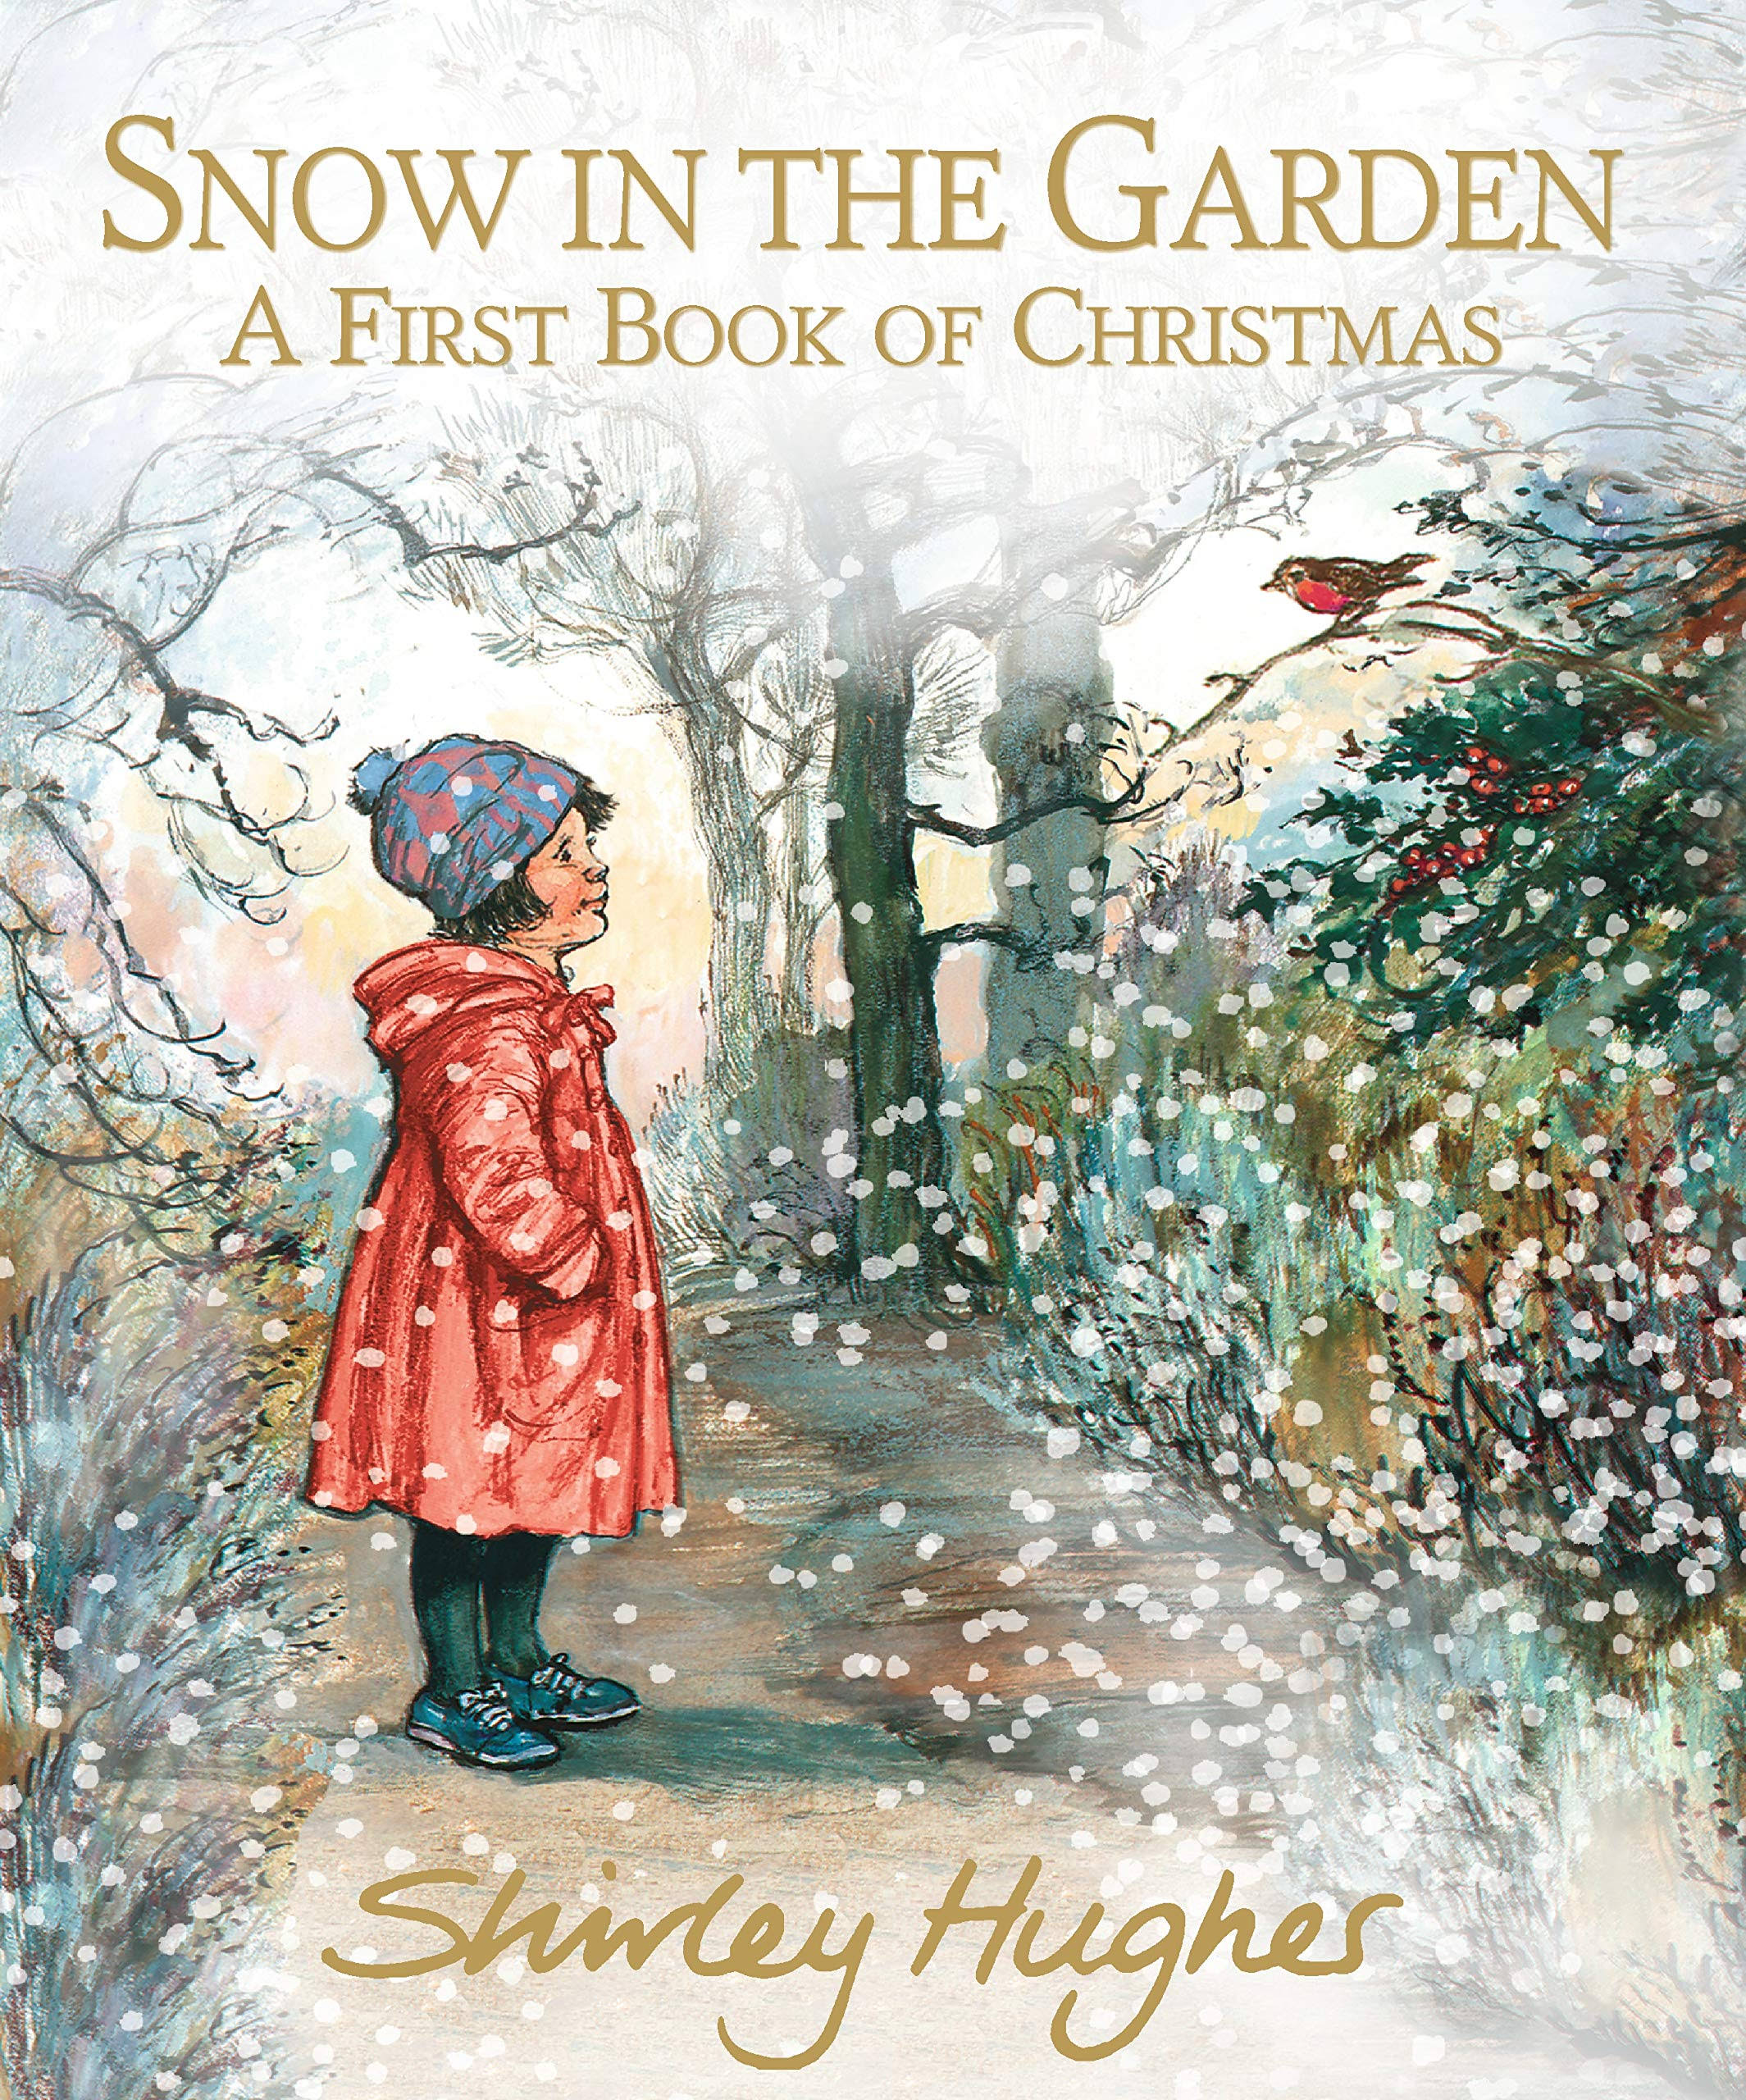 Snow in the Garden A First Book of Christmas by Shirley Hughes